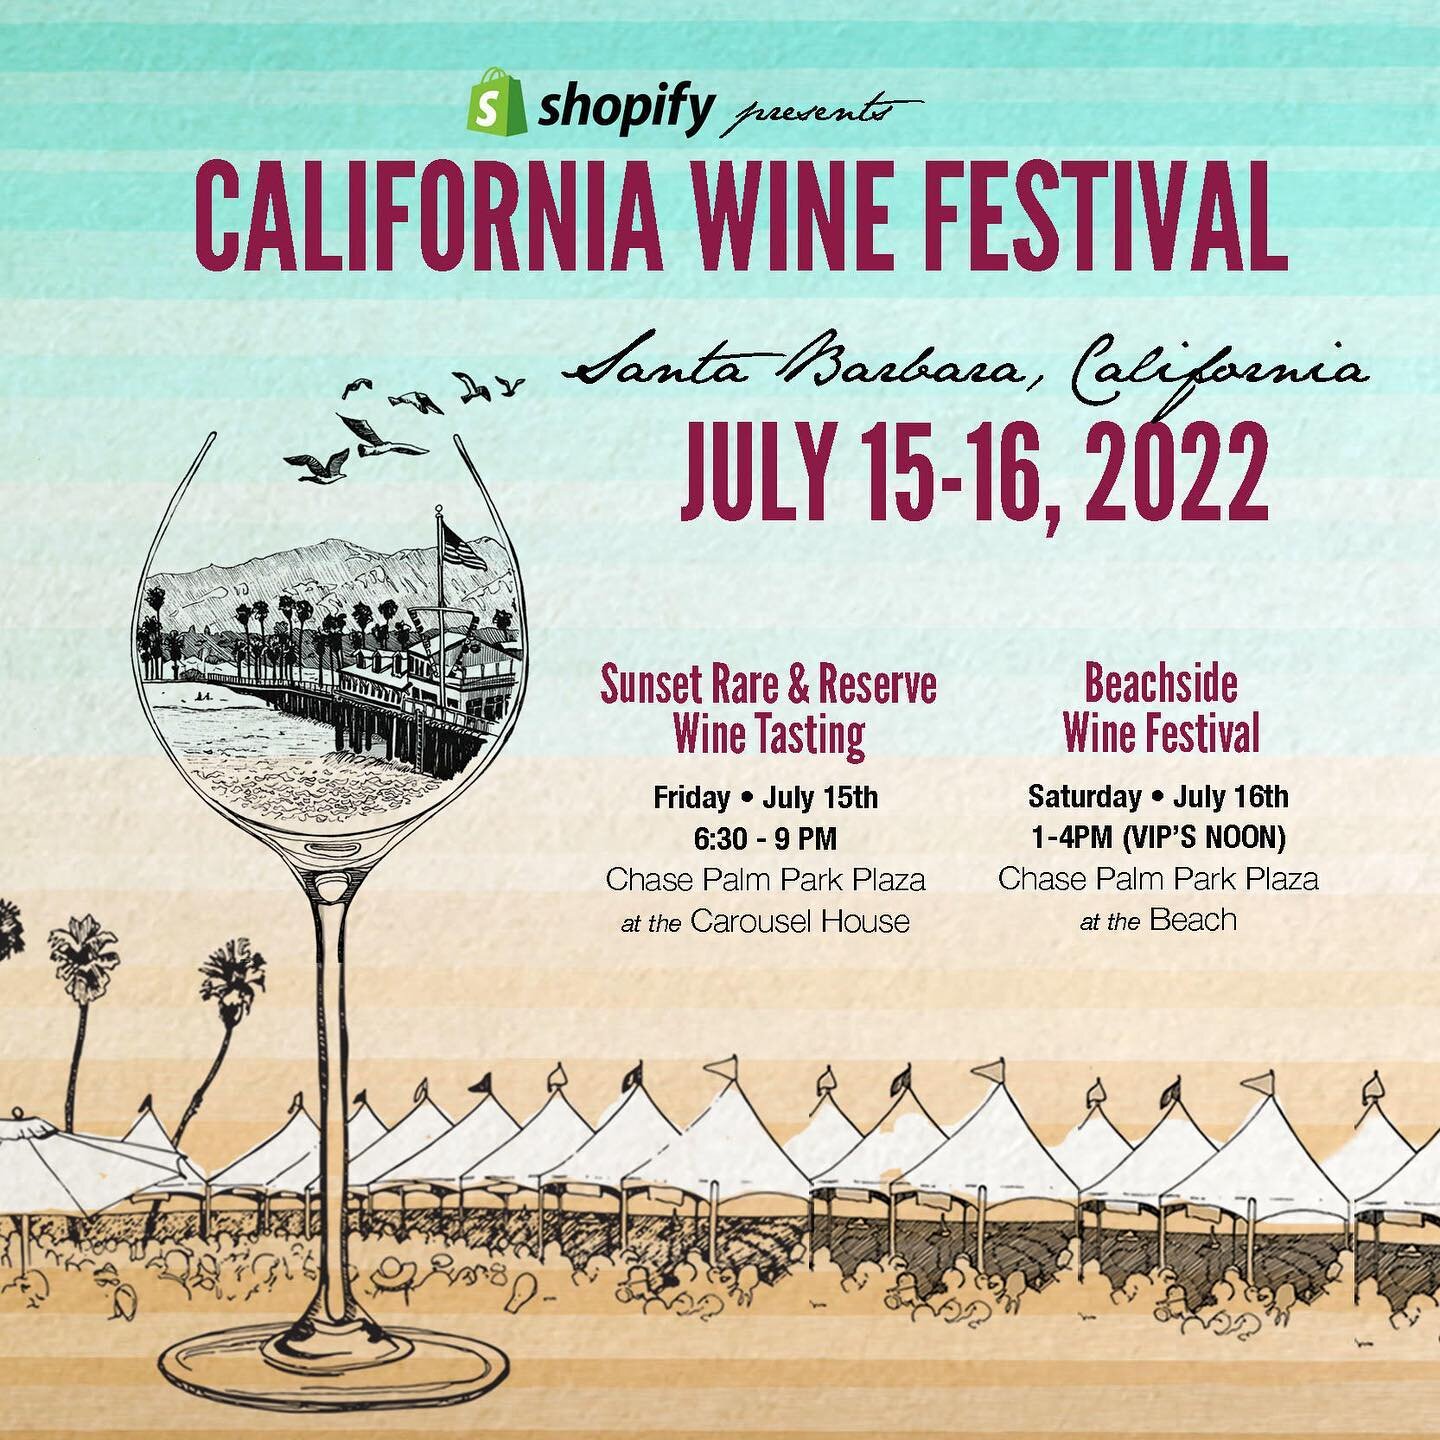 Join us at the California Wine Festival in Santa Barbara! 🍷

We are excited to announce that we will be pouring our award-winning estate wines at this years event! 

This is CWF&rsquo;s signature wine event. Thousands of wine lovers pour into Santa 